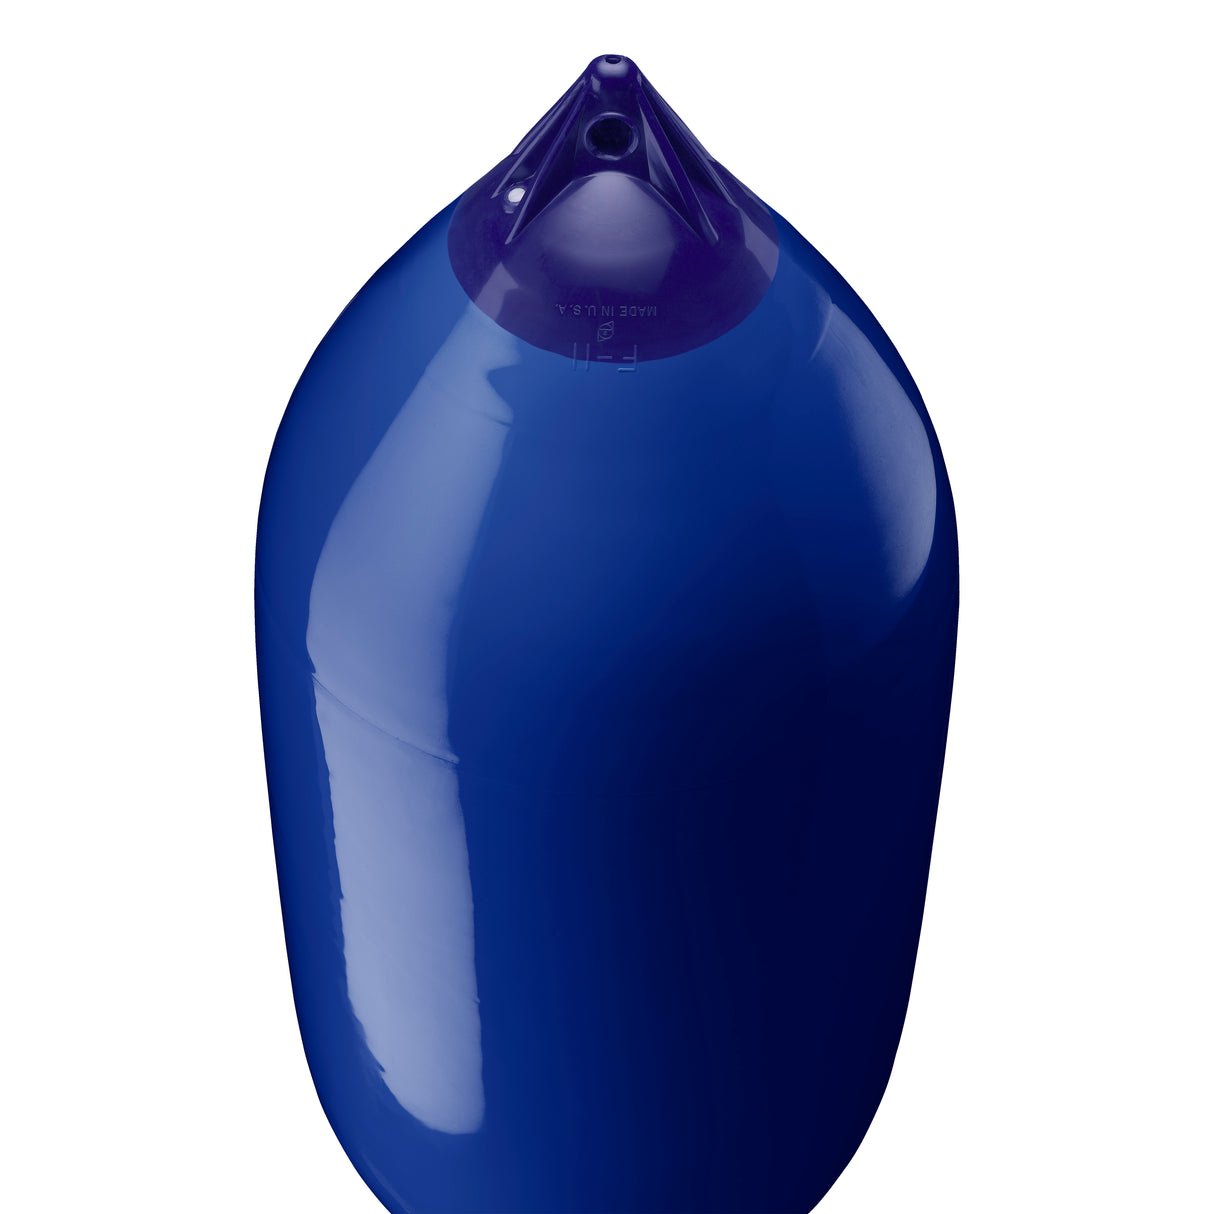 Cobalt Blue boat fender with Navy-Top, Polyform F-11 angled shot